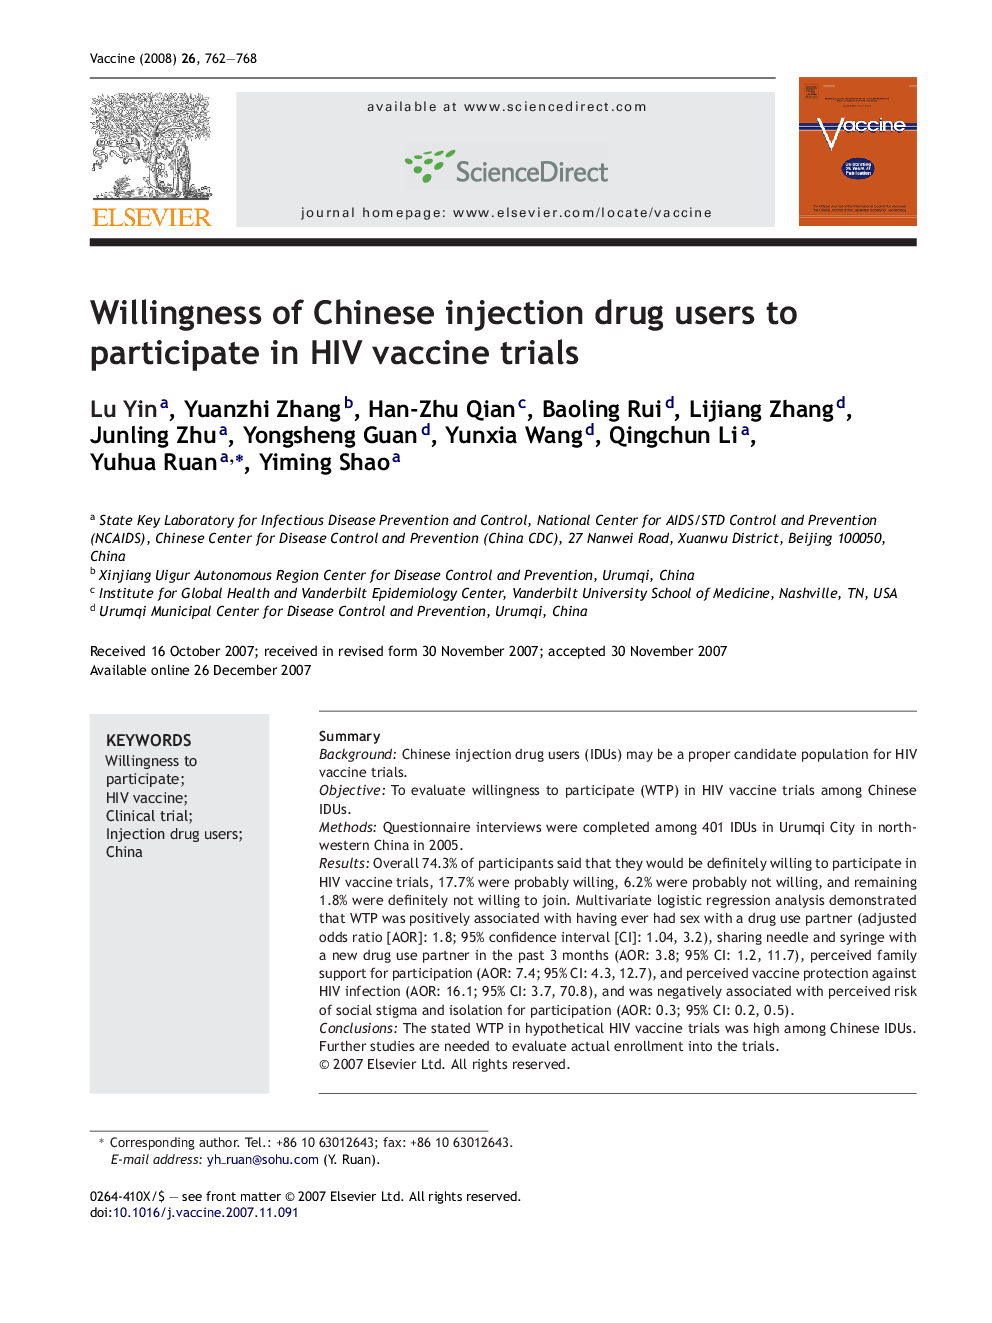 Willingness of Chinese injection drug users to participate in HIV vaccine trials